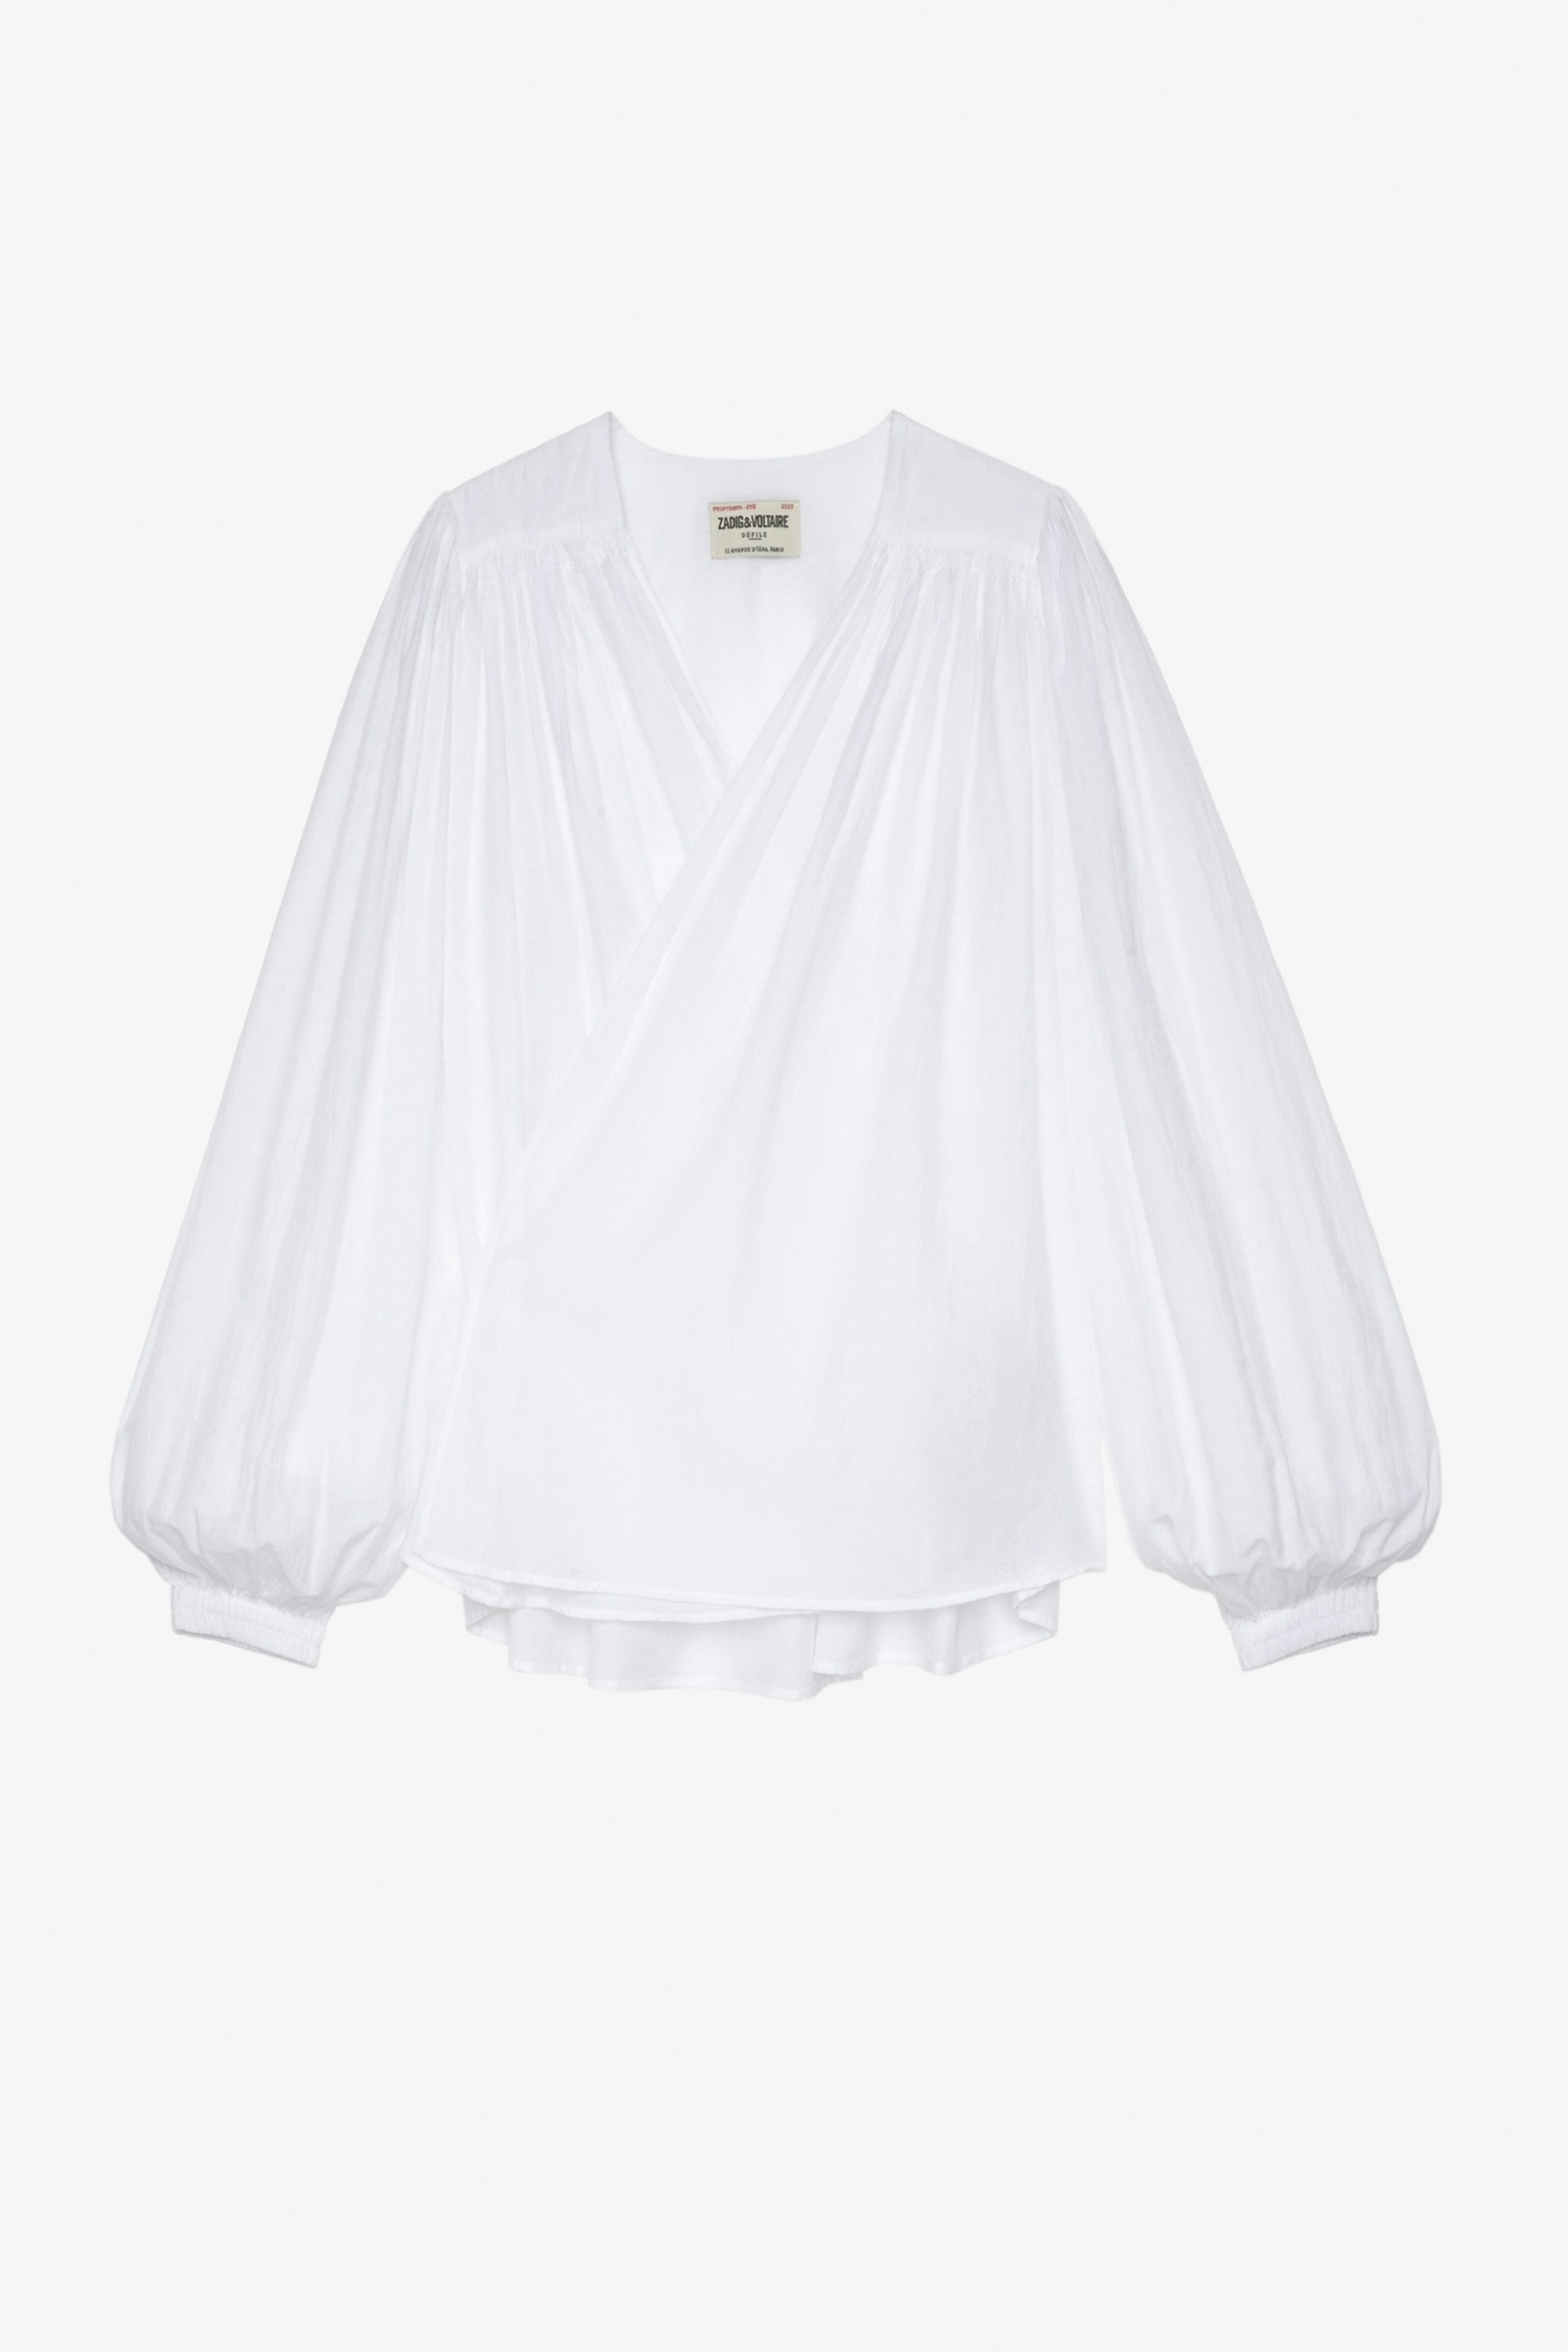 Tenew Shirt Women's off-white knotted wrapover shirt